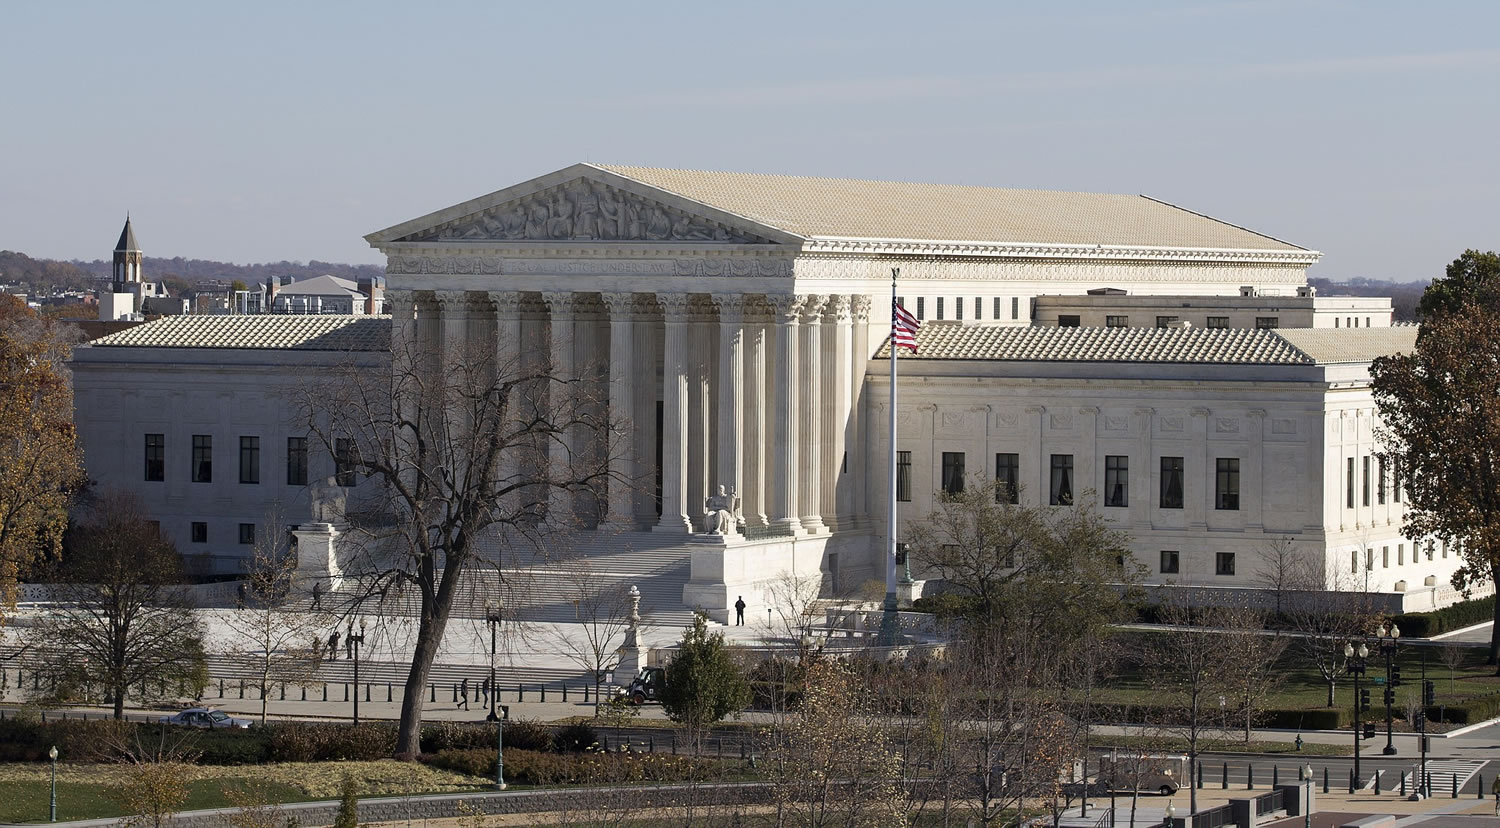 The U.S. Supreme Court in Washington, as seen from the roof of the U.S.